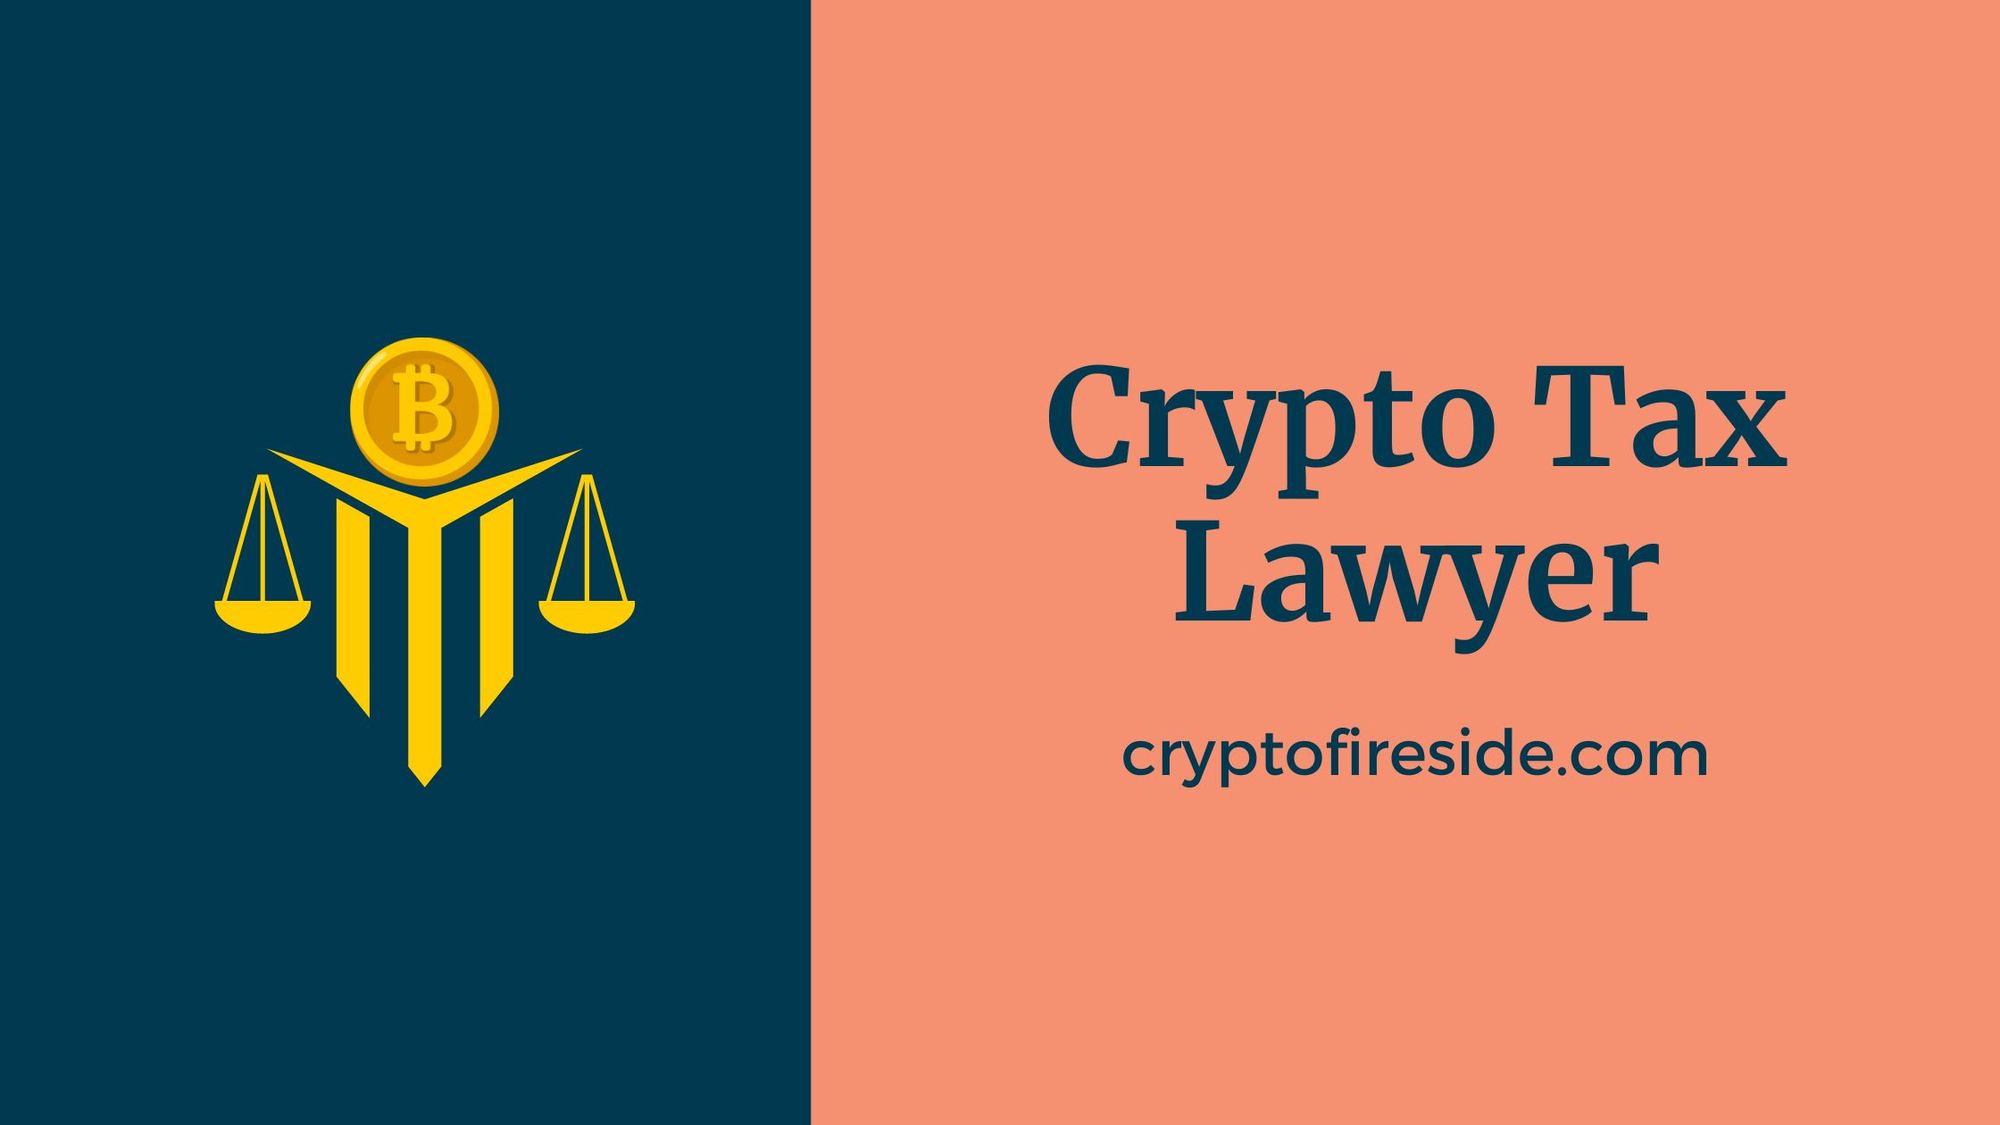 An image of a legal scale with a BItcoin logo and the words "Crypto Tax Lawyer"